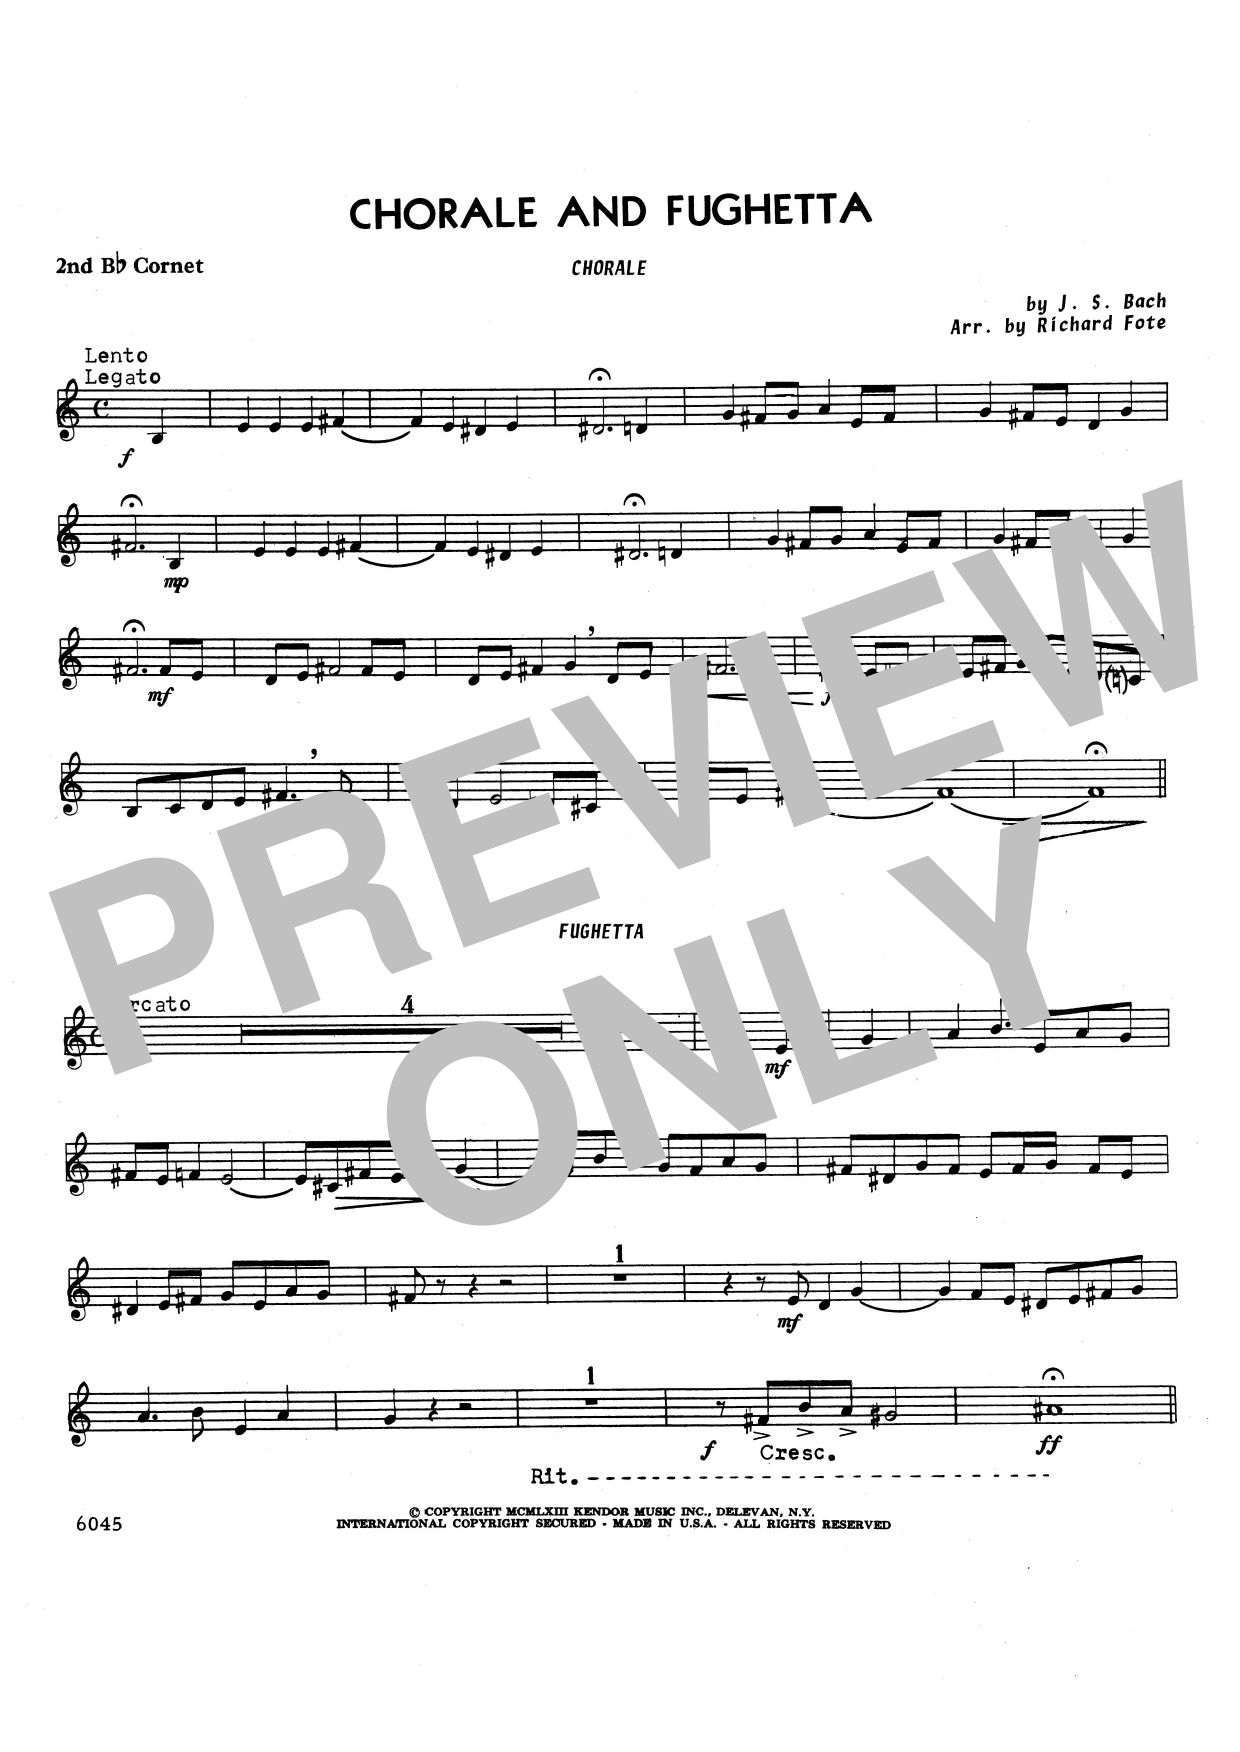 Download Richard Fote Chorale And Fughetta - 2nd Bb Trumpet Sheet Music